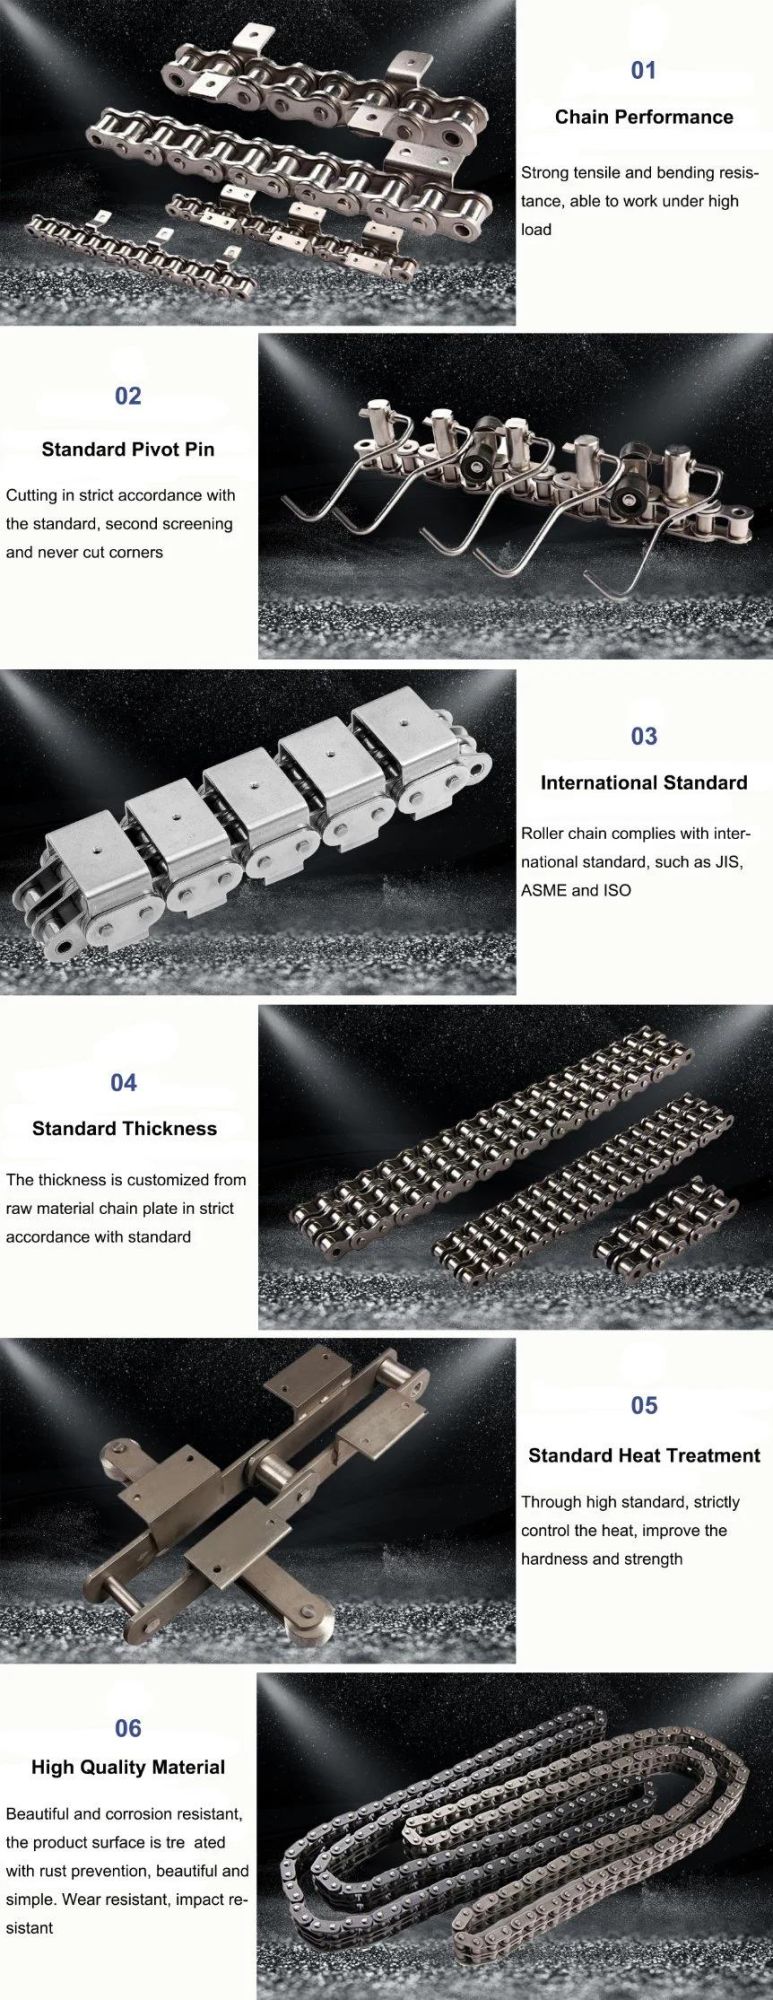 304 Stainless Steel Conveyor Roller Chain Lumber Conveyor Chain and Attachments